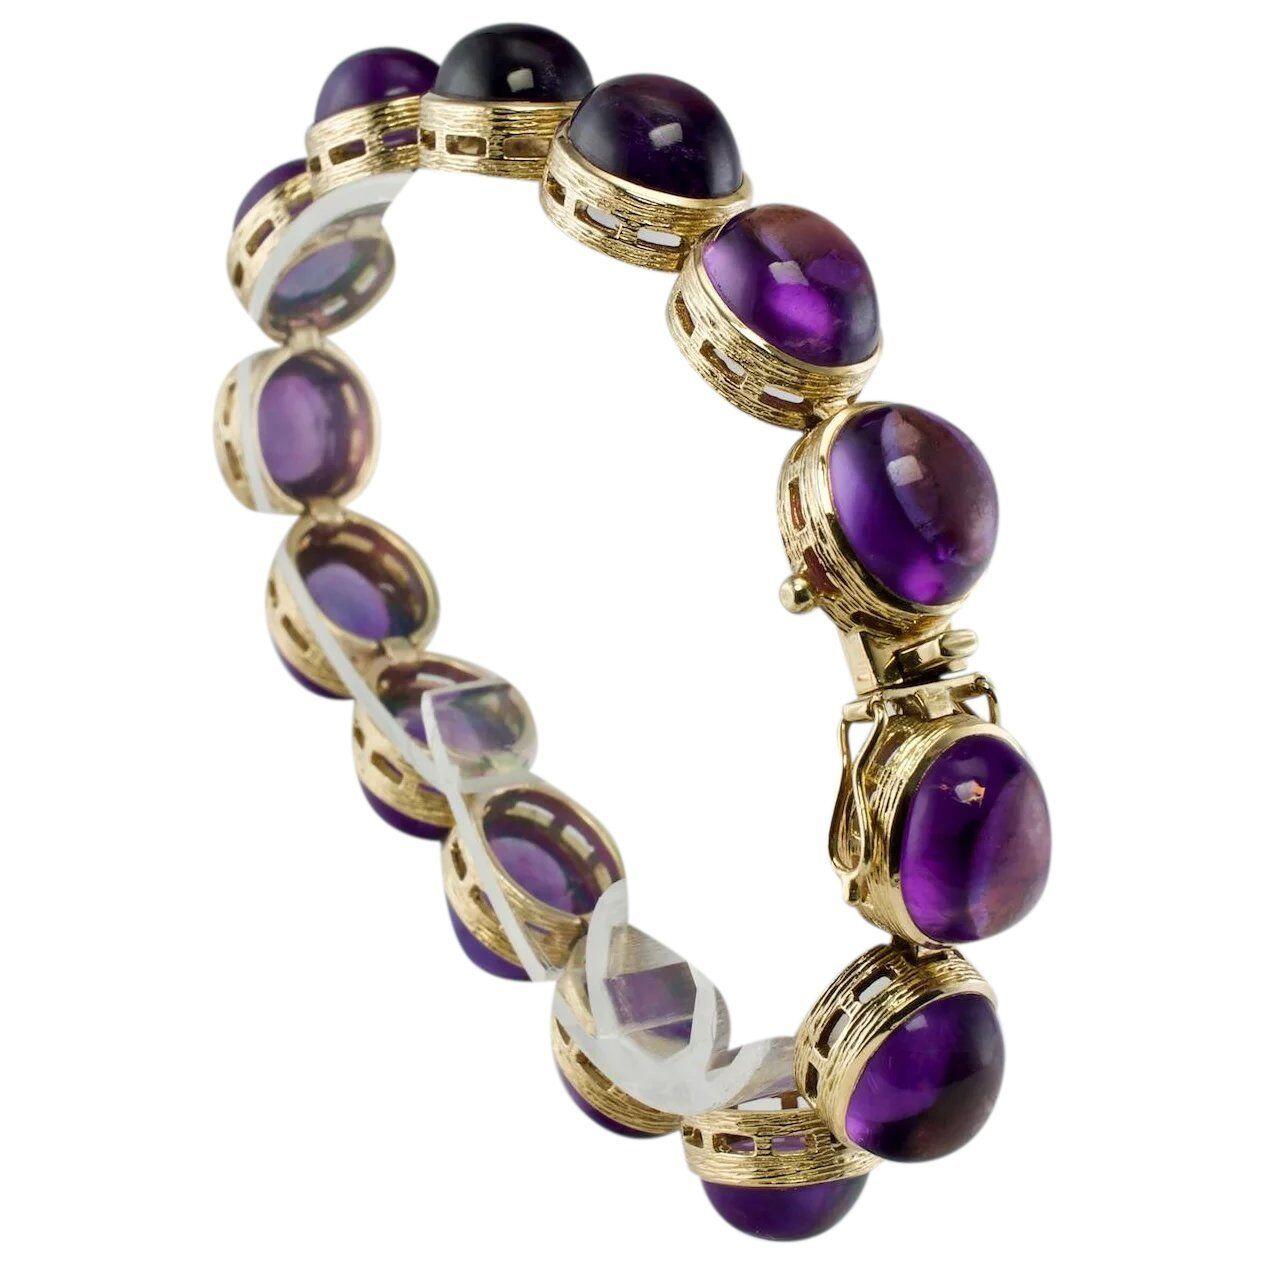 Amethyst Bracelet Cabochons 14K Gold 32.06 Tcw Vintage

This gorgeous estate bracelet is finely crafted in solid 14K Yellow gold and it is set with genuine Earth mined Amethyst cabochons. Each gem is 10mmx 8mm for the total weight of 32.06 carats.